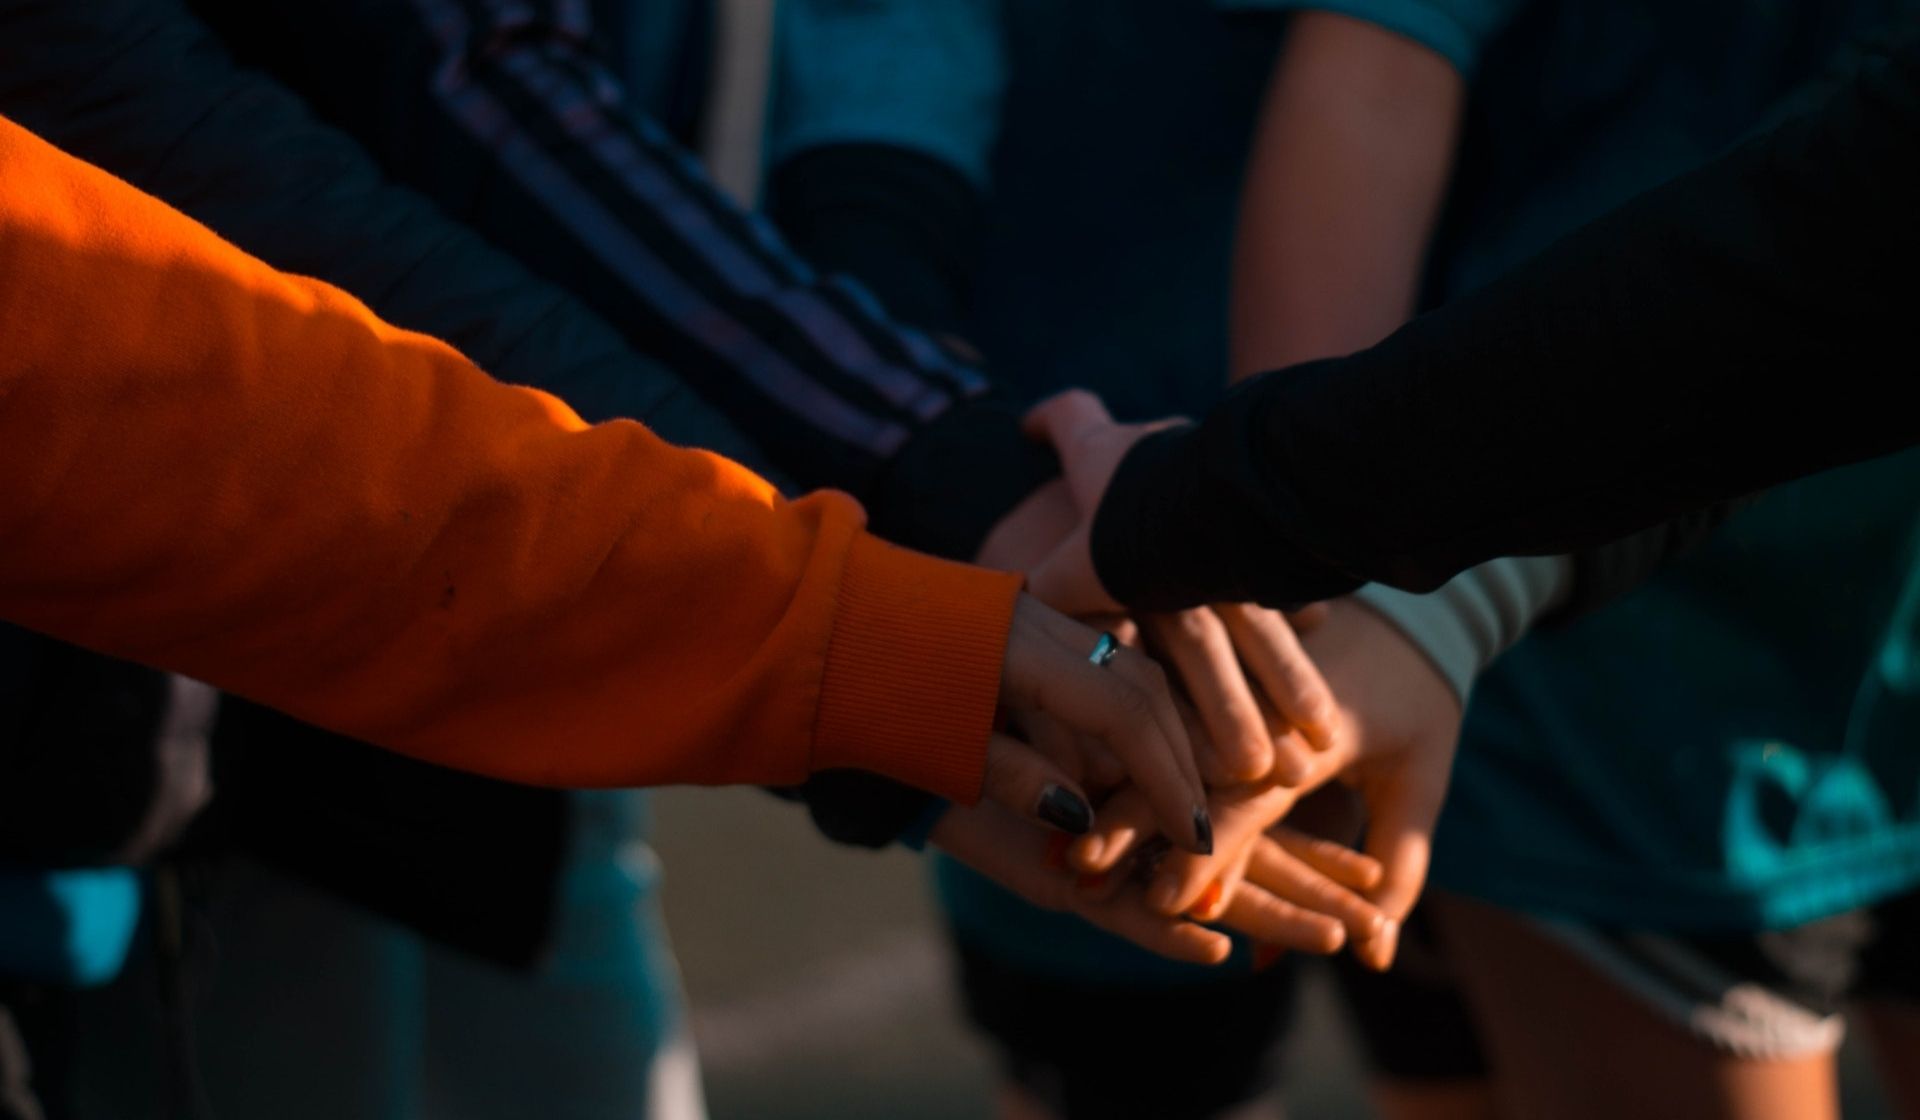 A photo of five people's hands, clasped together